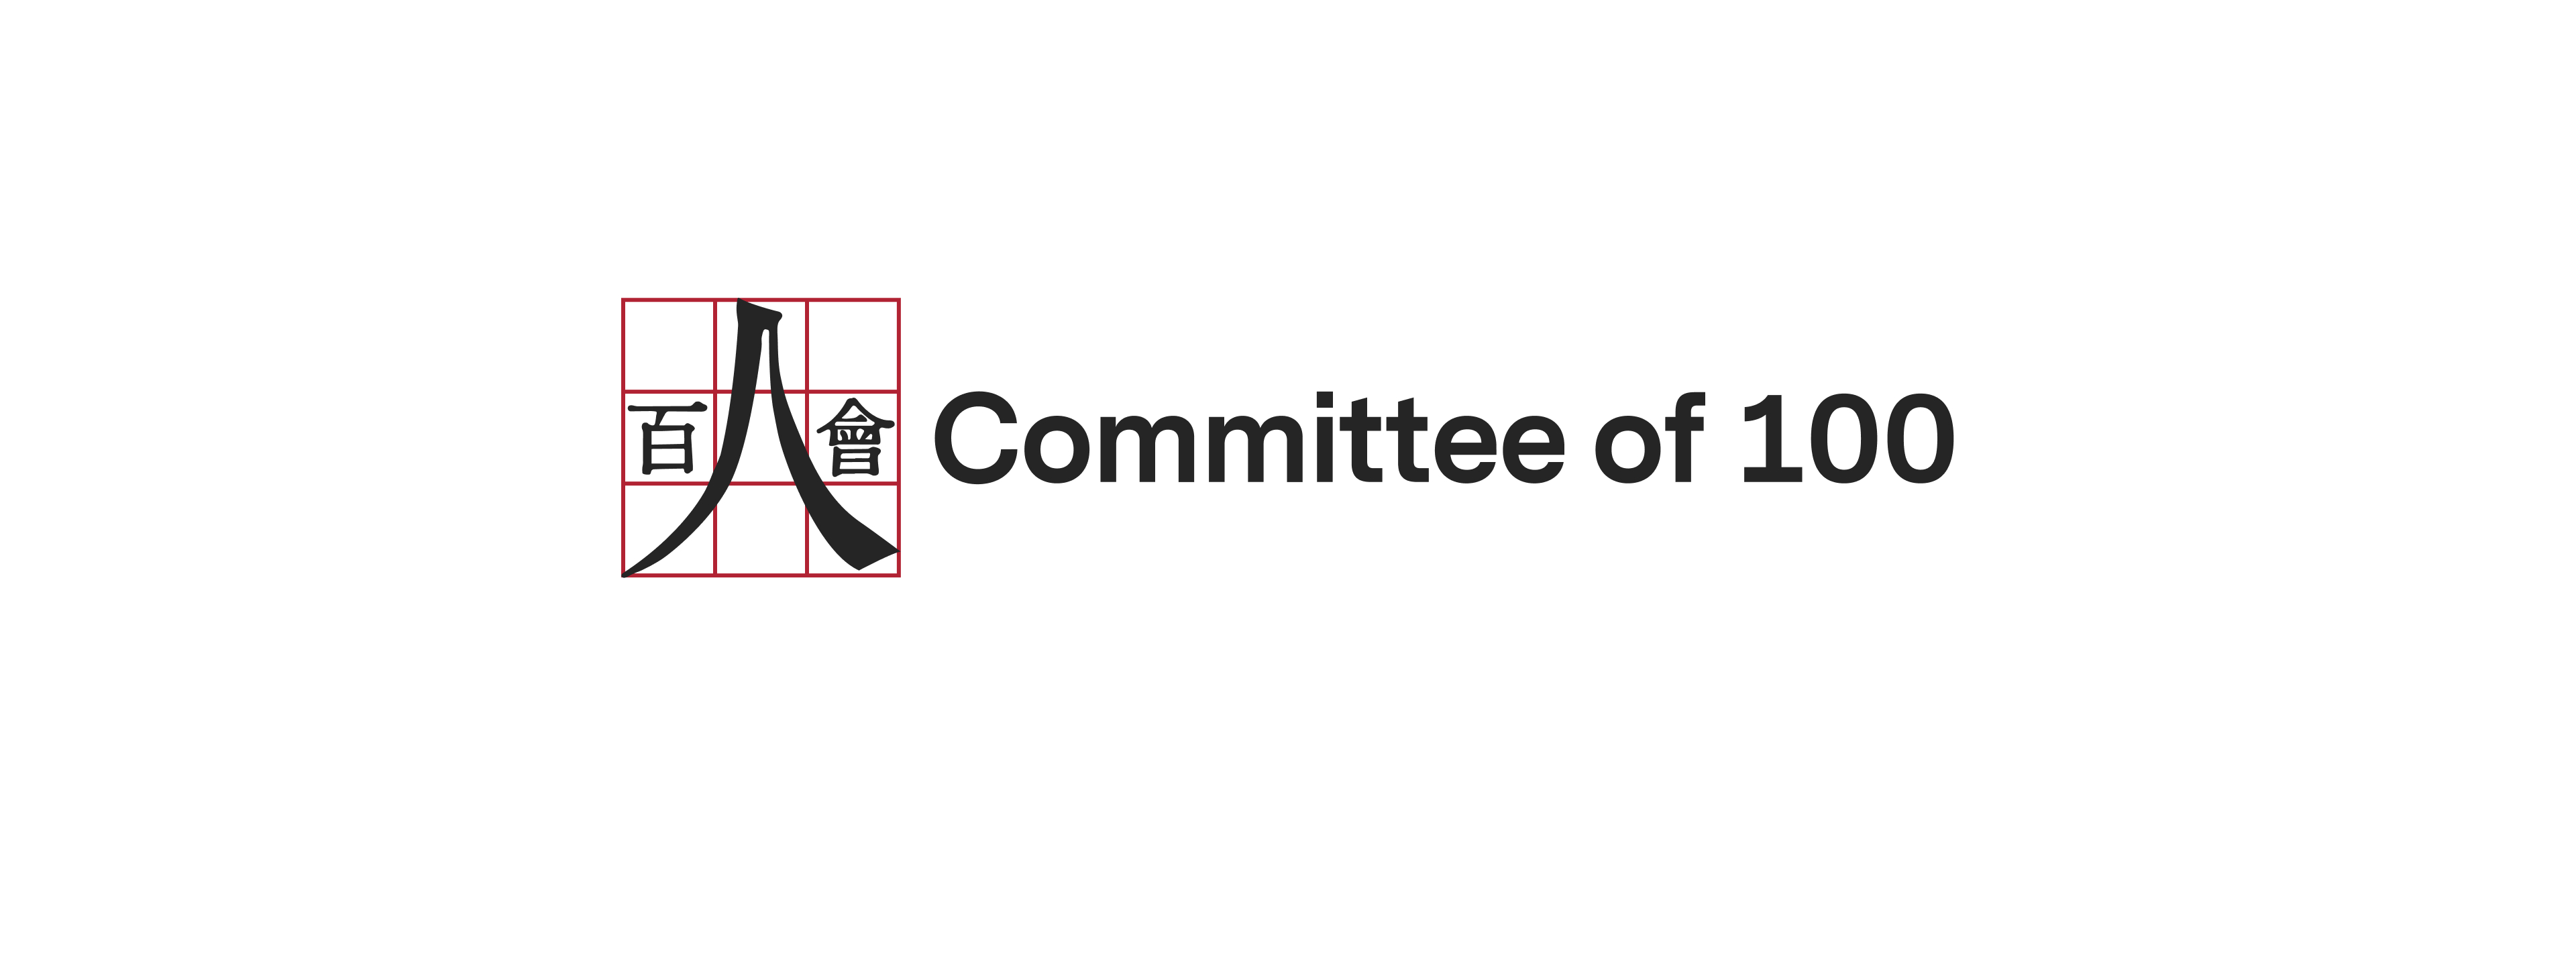 Statement From Committee of 100 on the Congressional Roundtable ‘Researching While Chinese American’